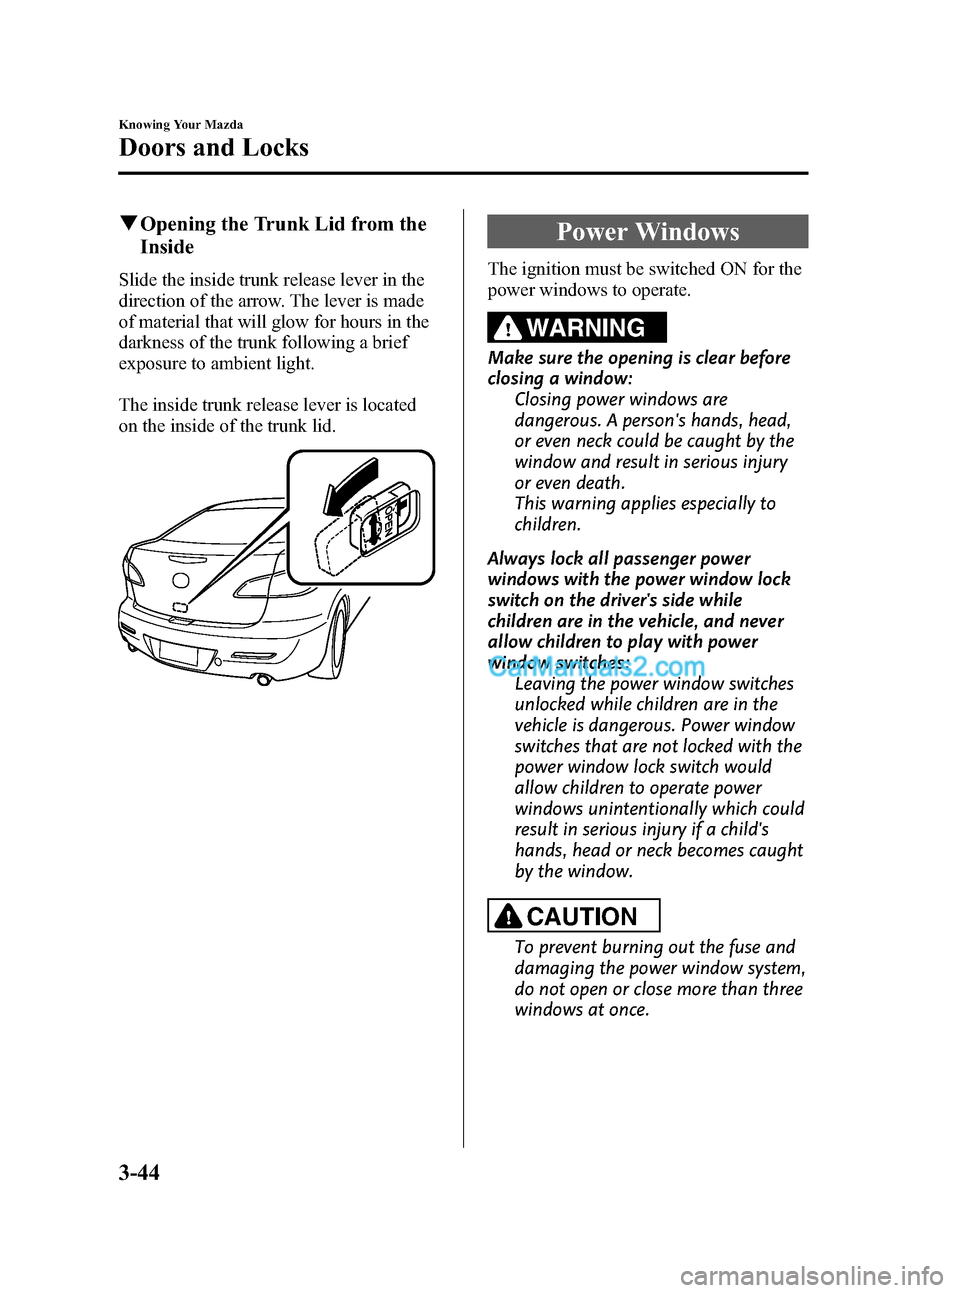 MAZDA MODEL MAZDASPEED 3 2011  Owners Manual (in English) Black plate (120,1)
qOpening the Trunk Lid from the
Inside
Slide the inside trunk release lever in the
direction of the arrow. The lever is made
of material that will glow for hours in the
darkness of